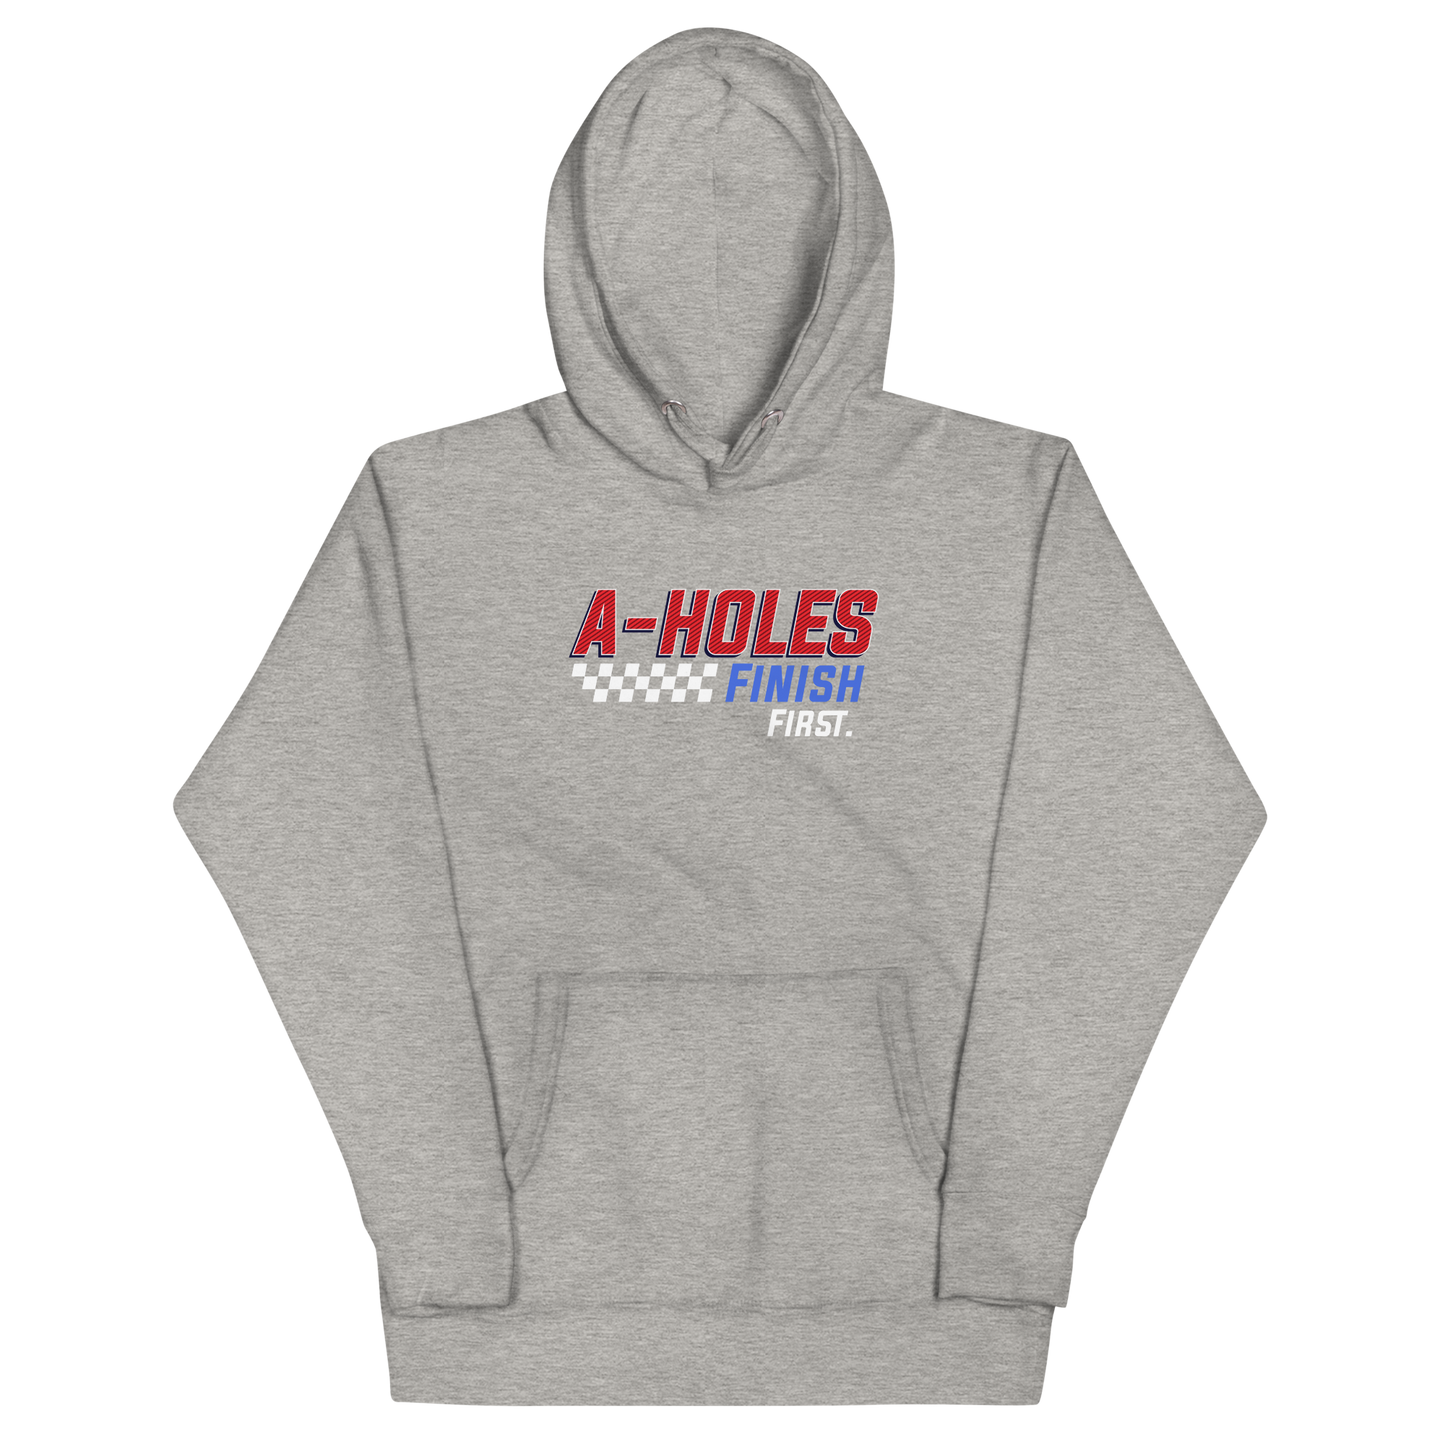 A-Hole "First Place" Unisex Hoodie